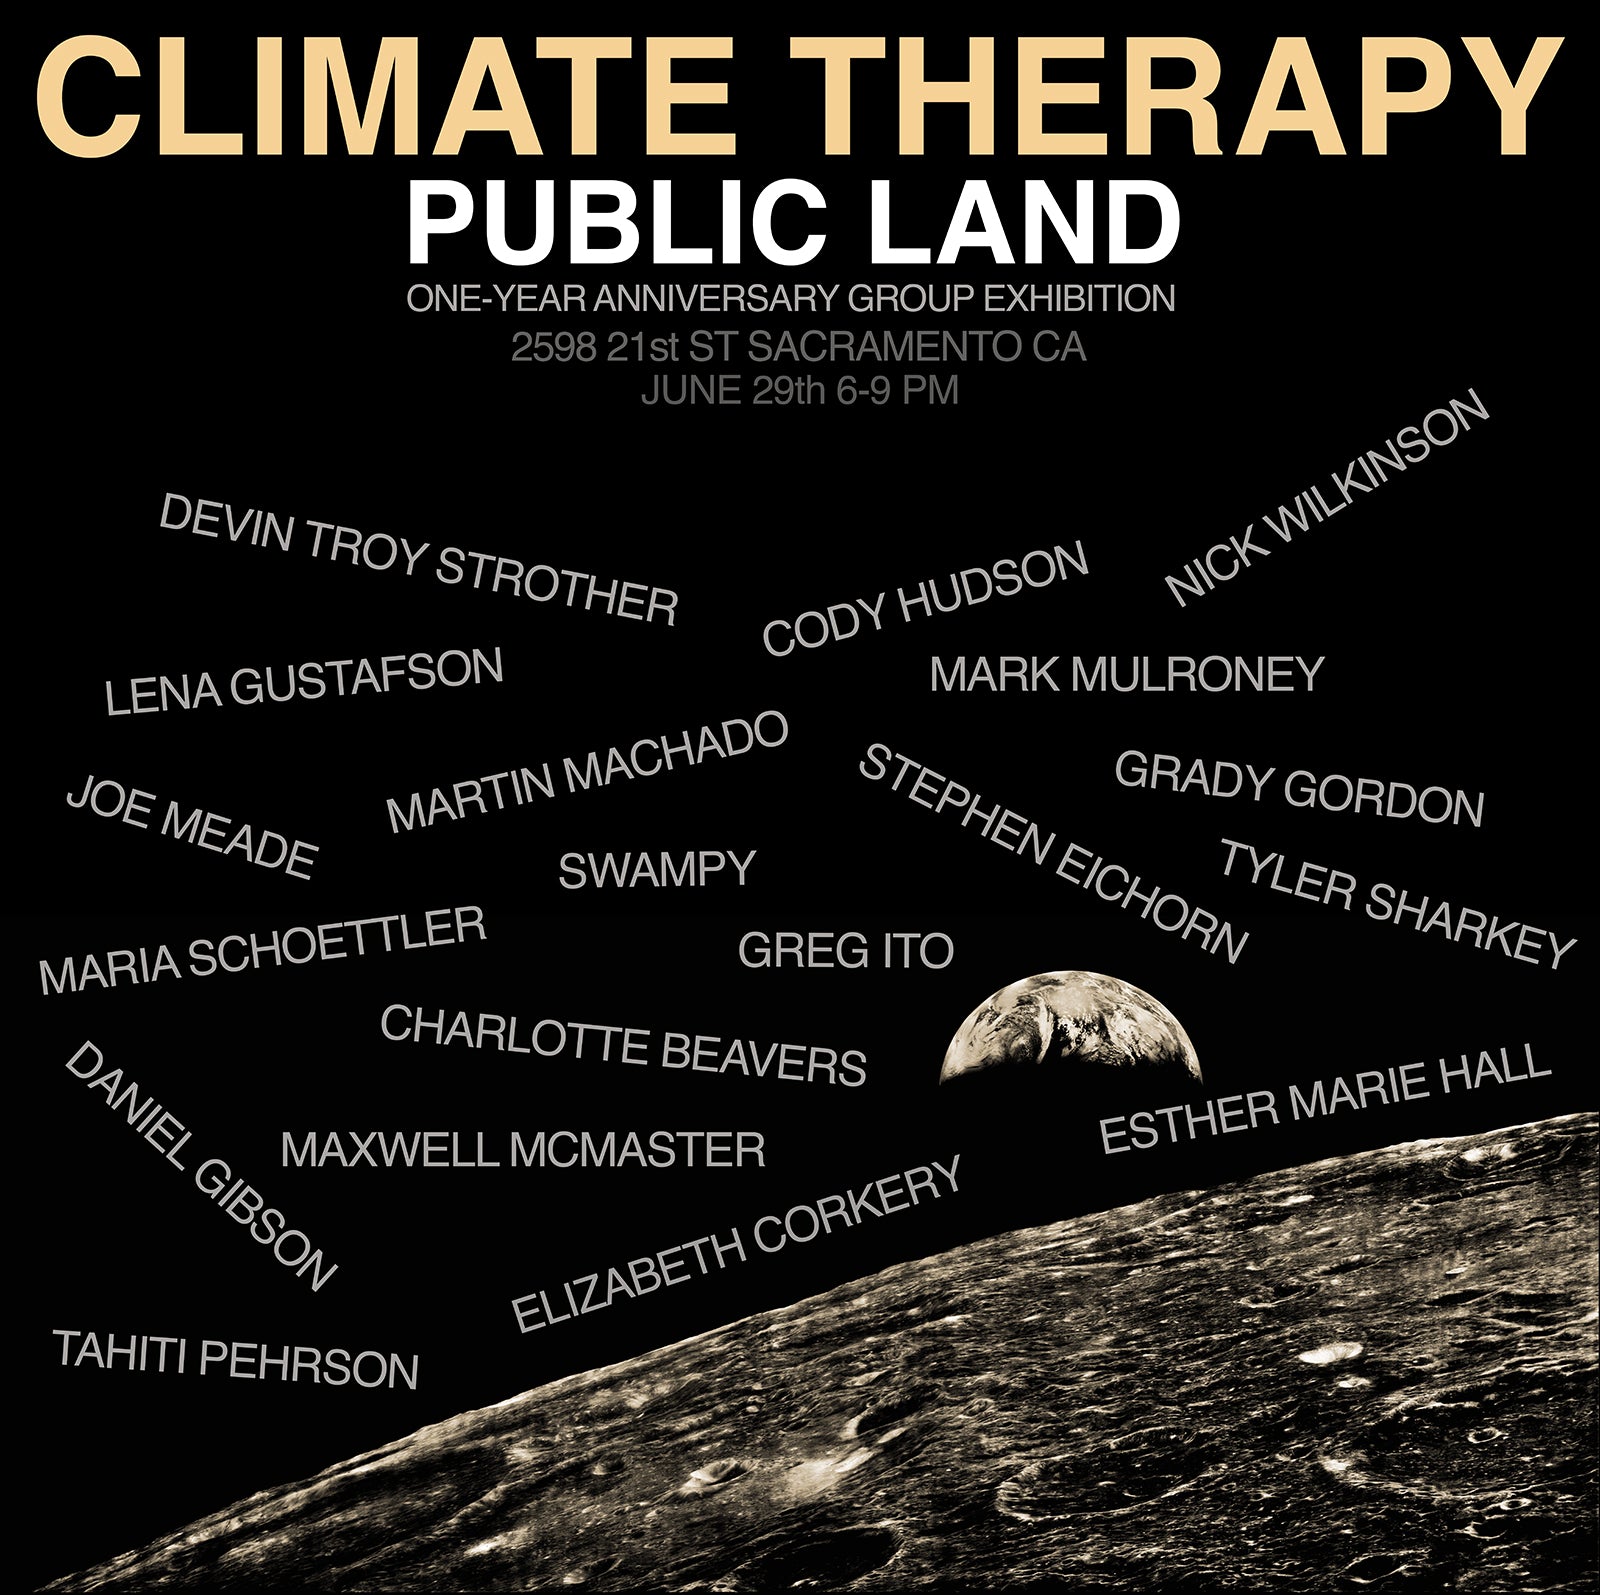 Public Land one-year anniversary group show "Climate Therapy"